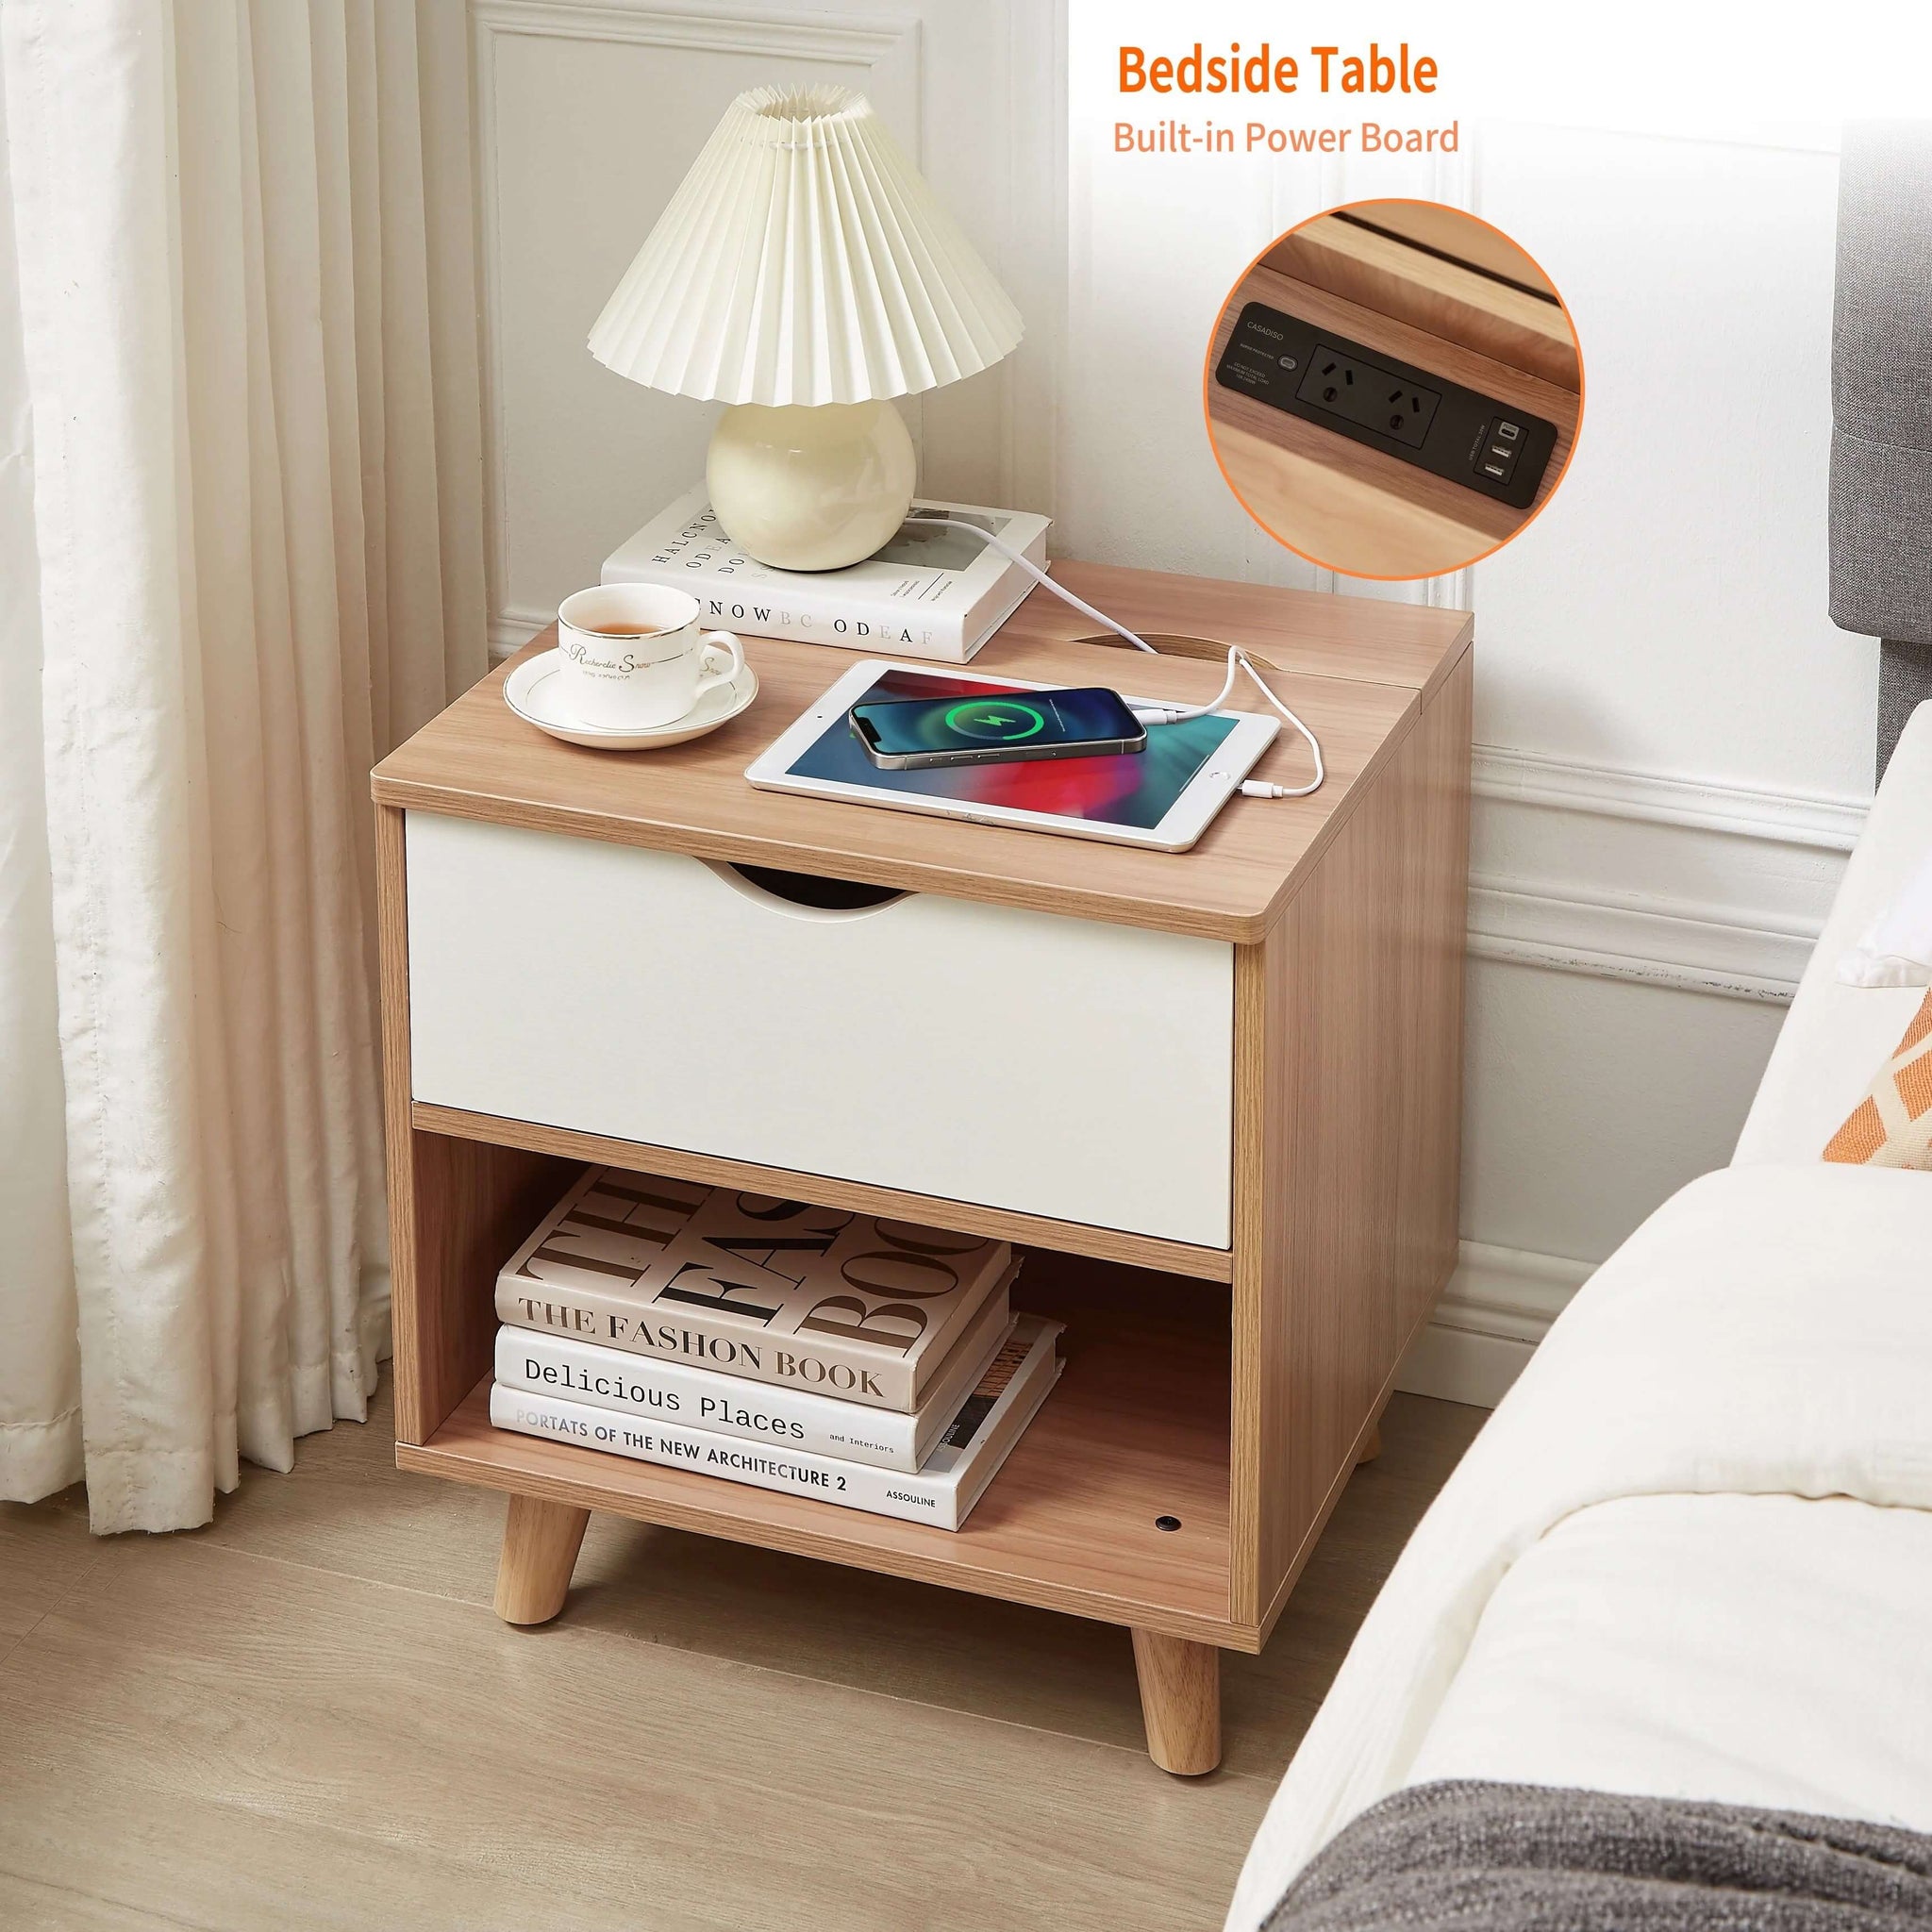 Multifunctional Bedside Table with Built-in Charging-Upinteriors